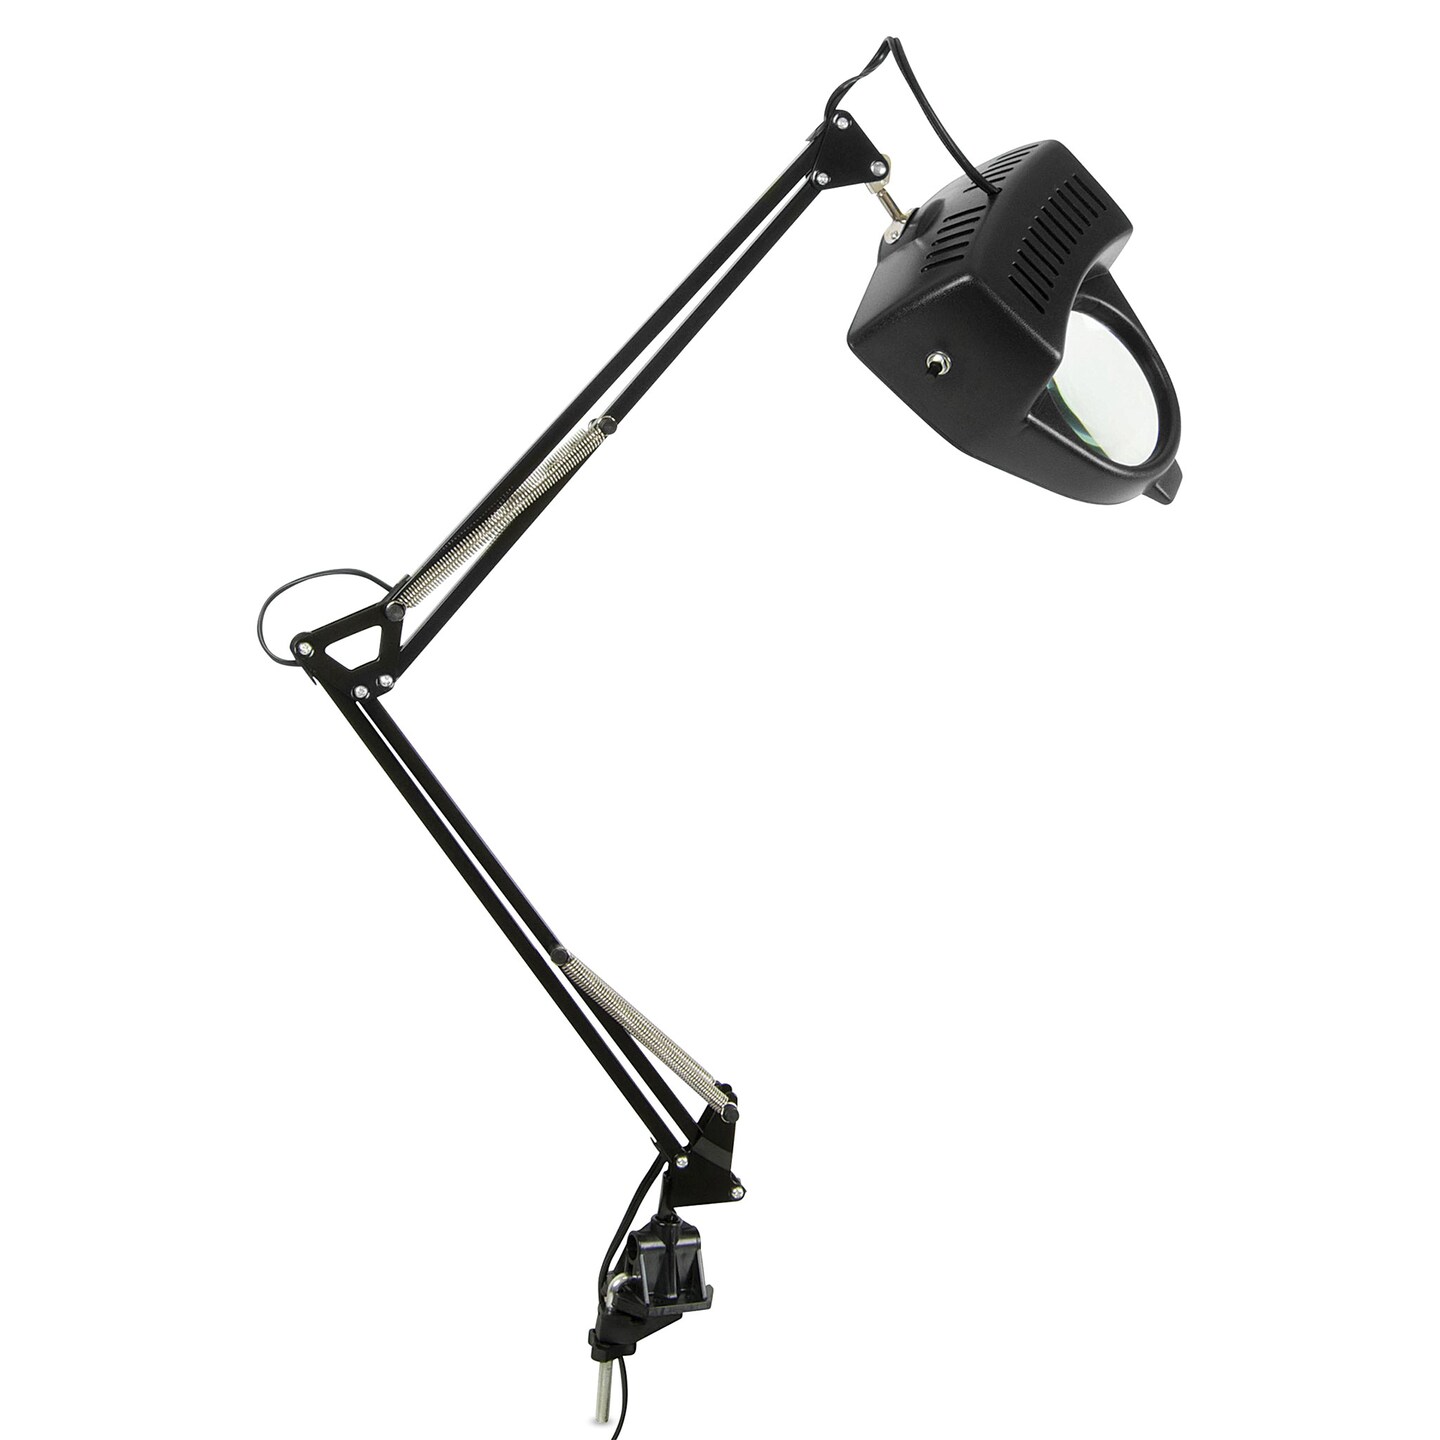 Studio Designs Magnifier Lamp - Black, Diopter 3, 1.75X Magnification